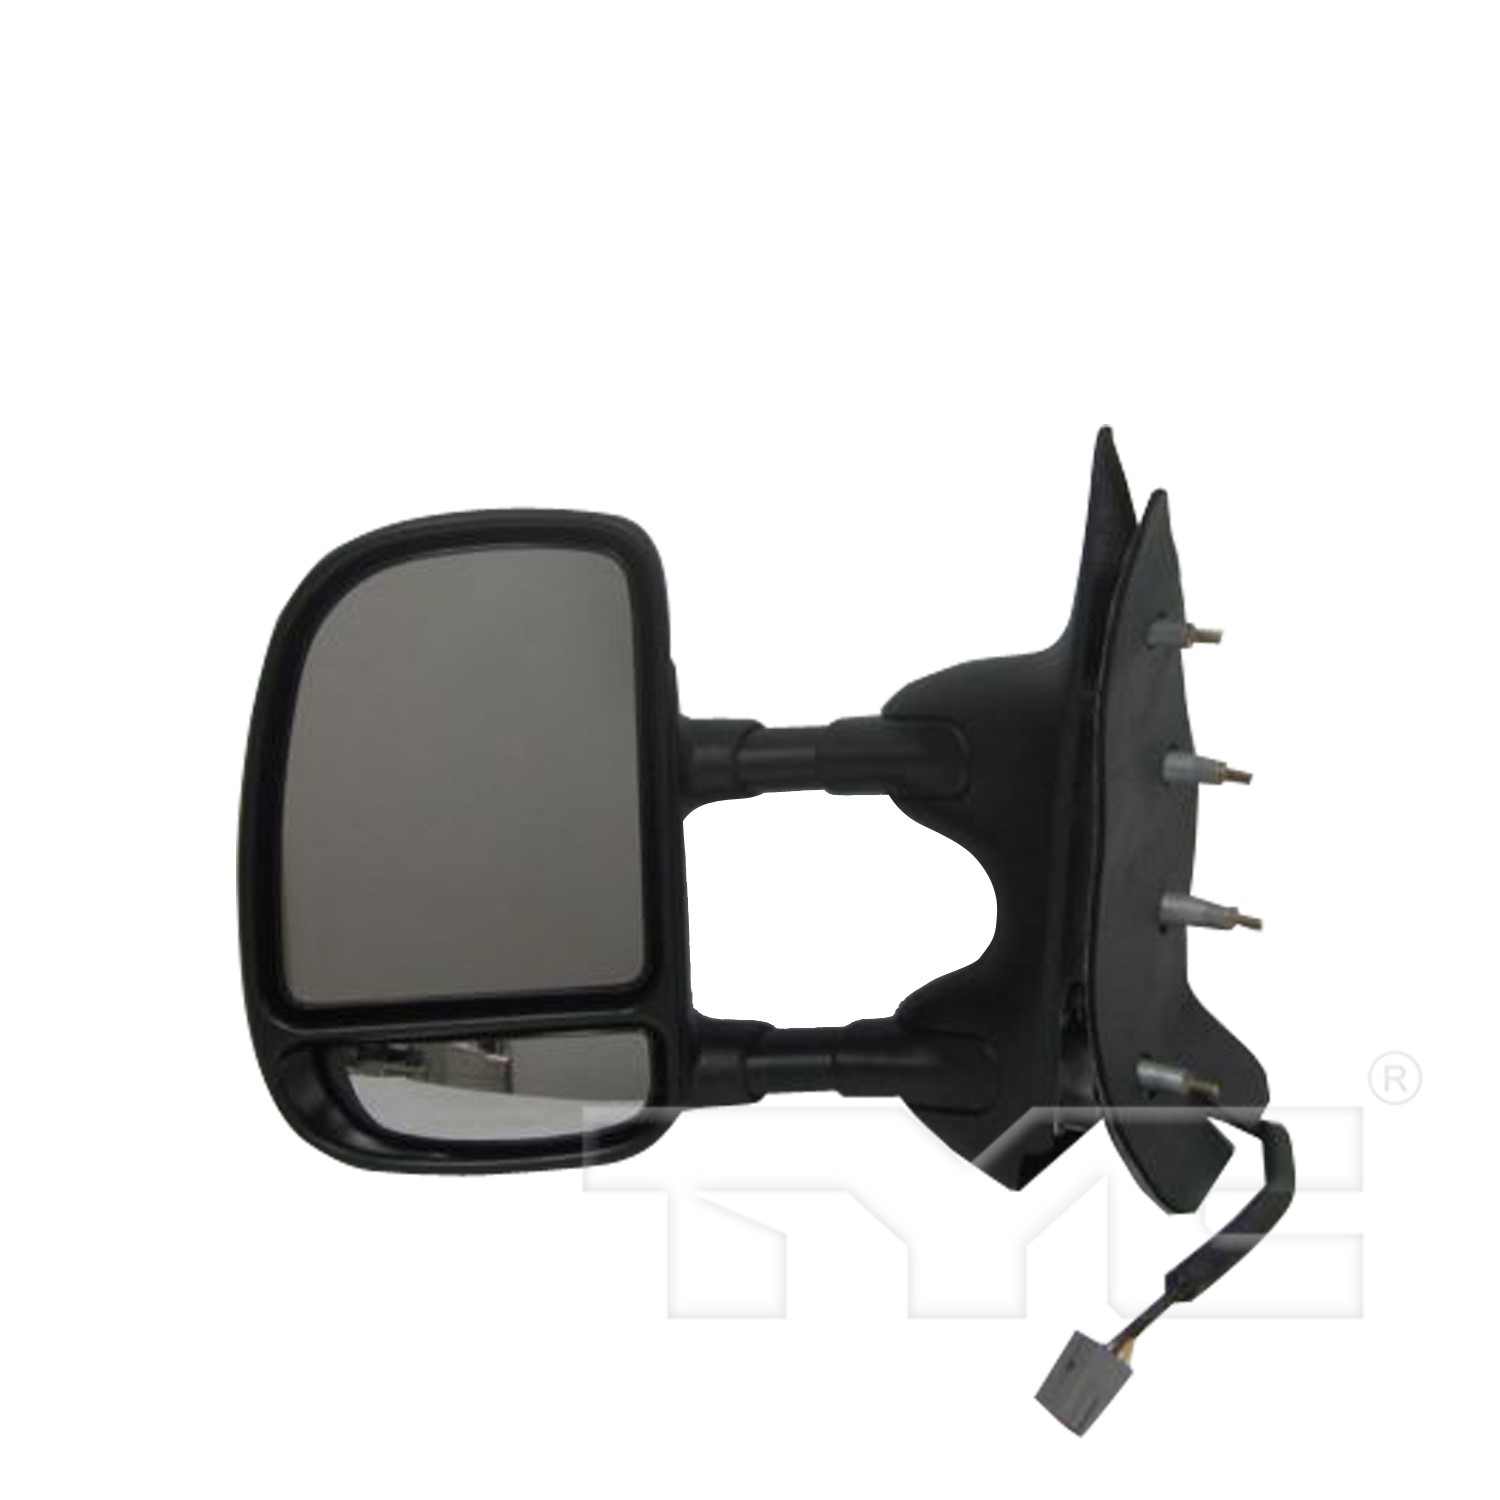 Aftermarket MIRRORS for FORD - E-450 SUPER DUTY, E-450 SUPER DUTY,09-14,LT Mirror outside rear view